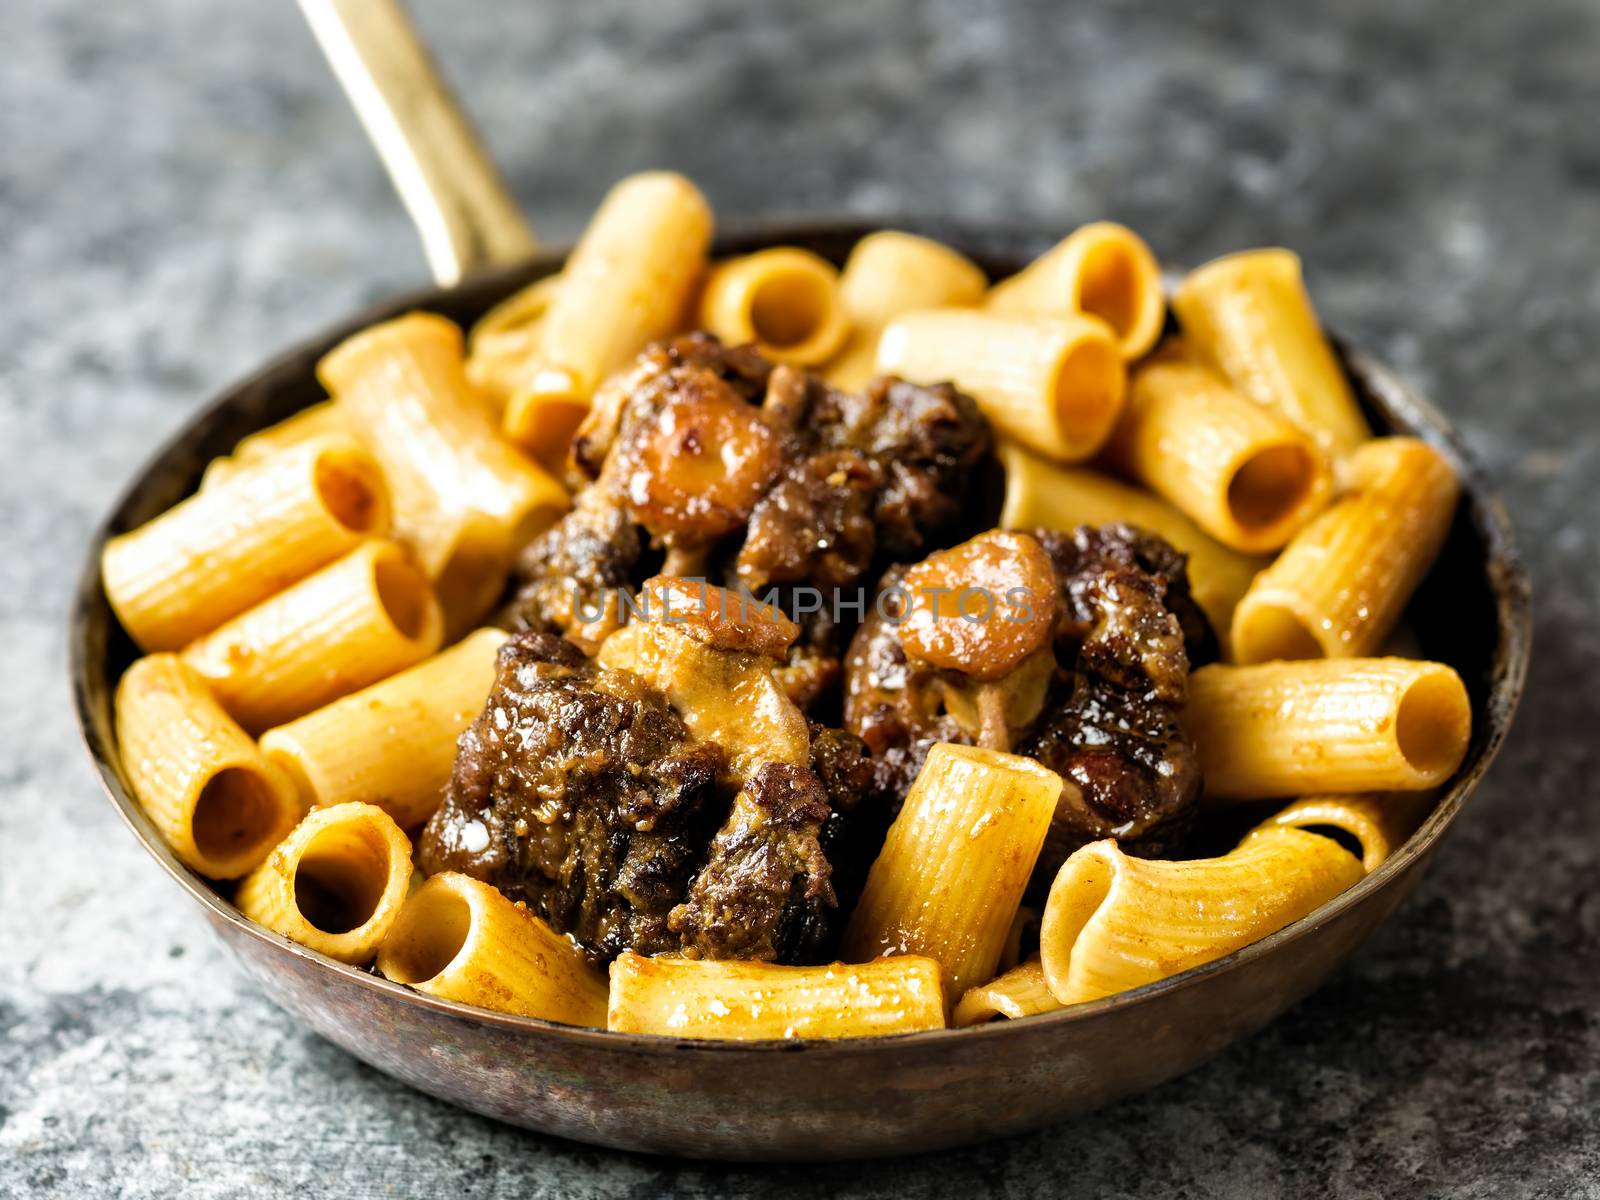 rustic italian oxtail ragu pasta by zkruger